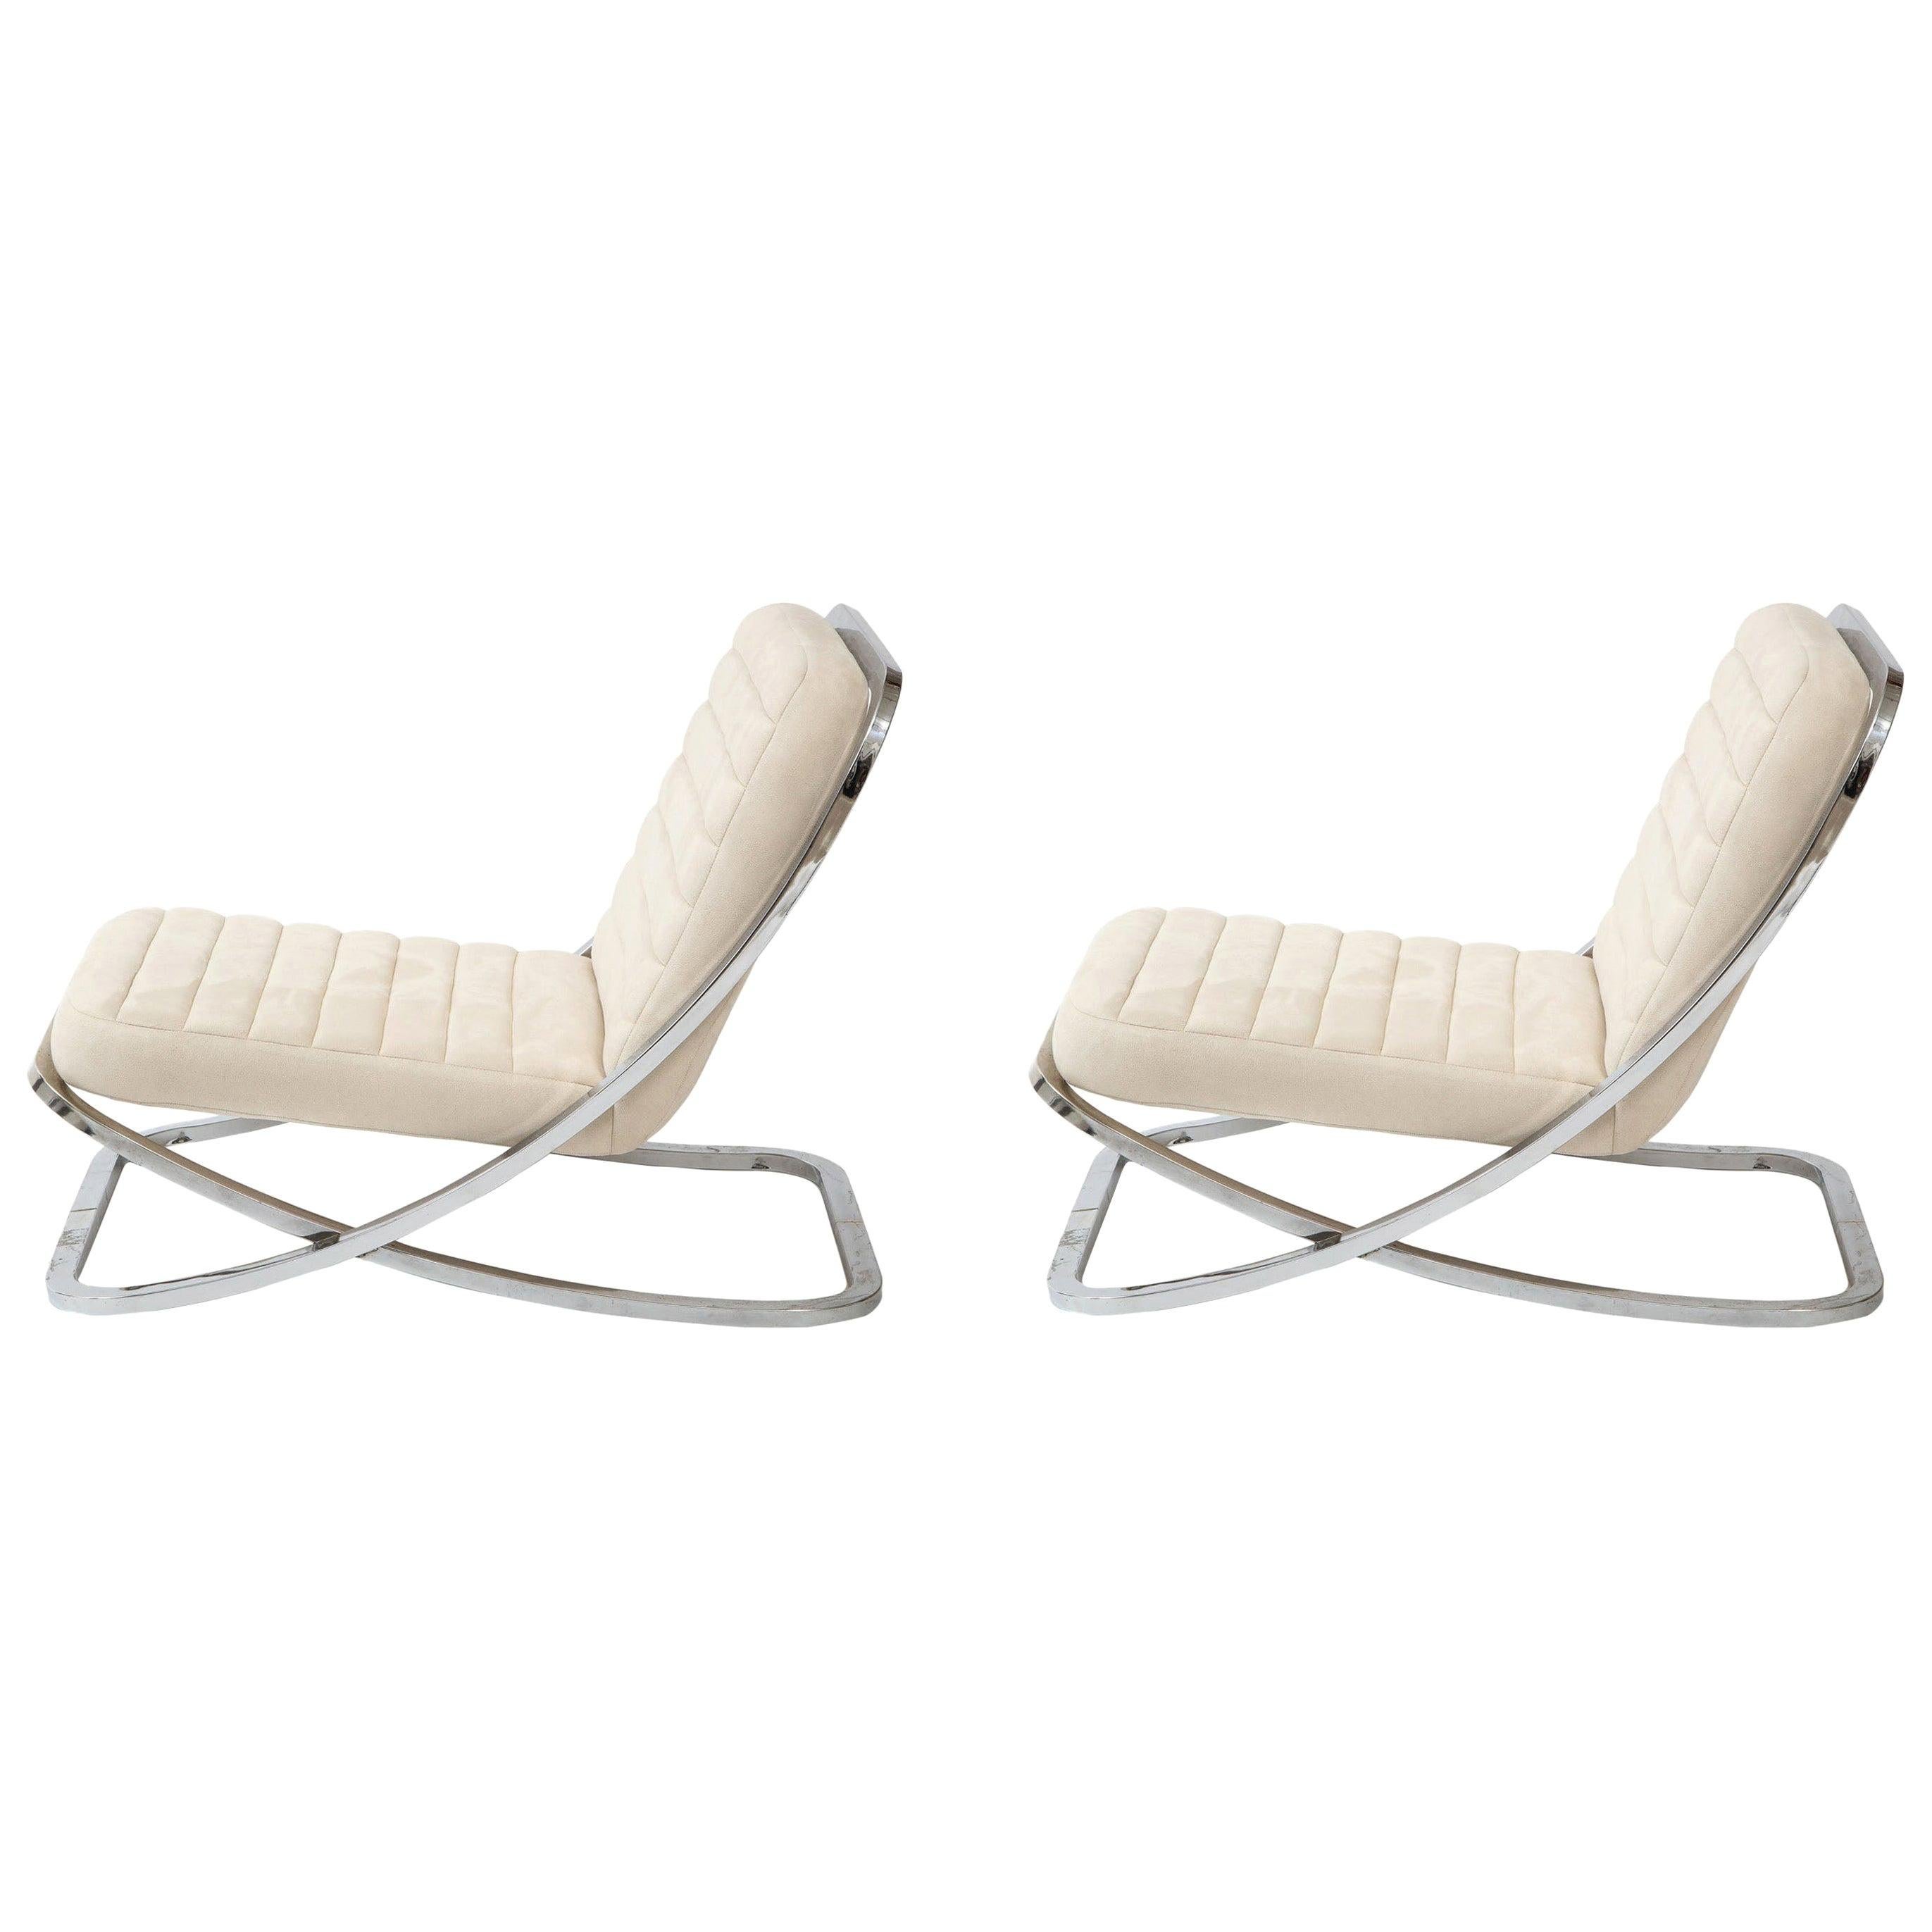 Pair of Low White Ultra Suede and Polished Chrome Lounge Chairs, 1970s, France